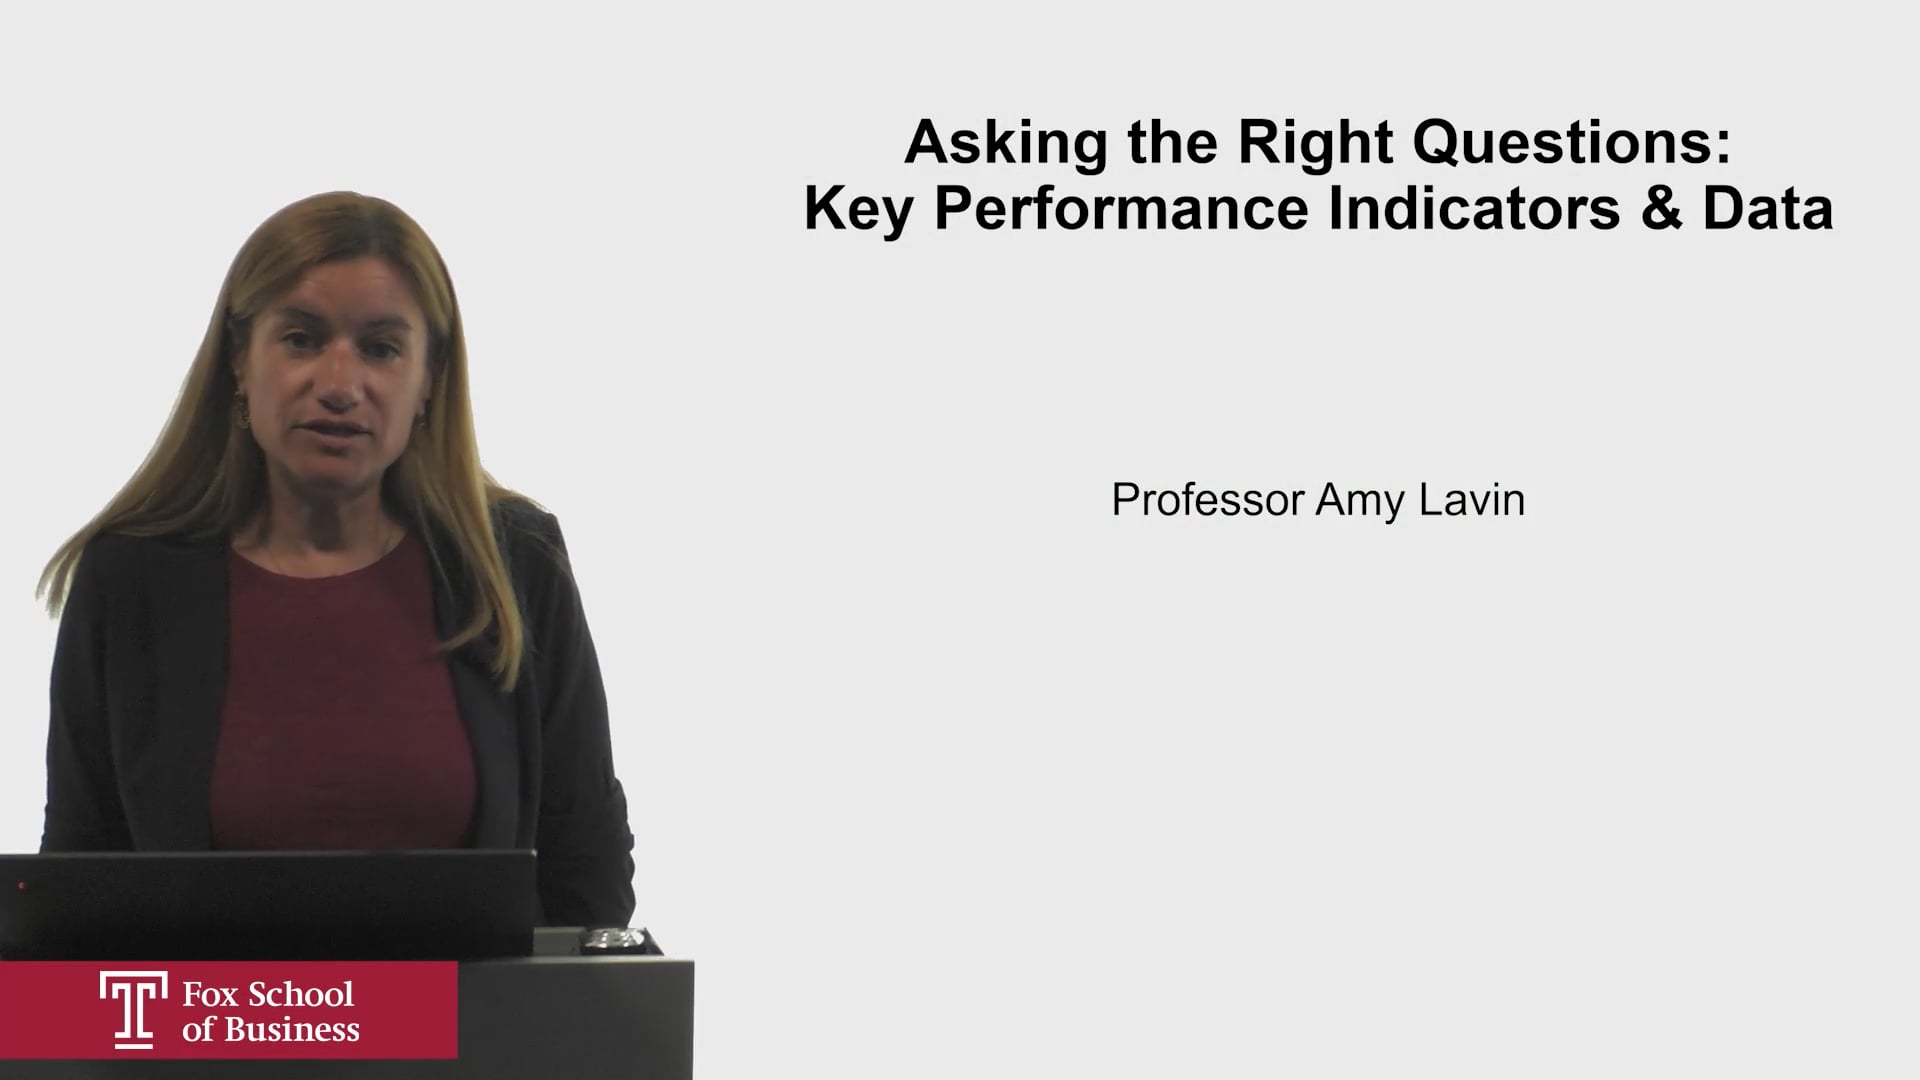 Asking the Right Questions: Key Performance Indicators & Data